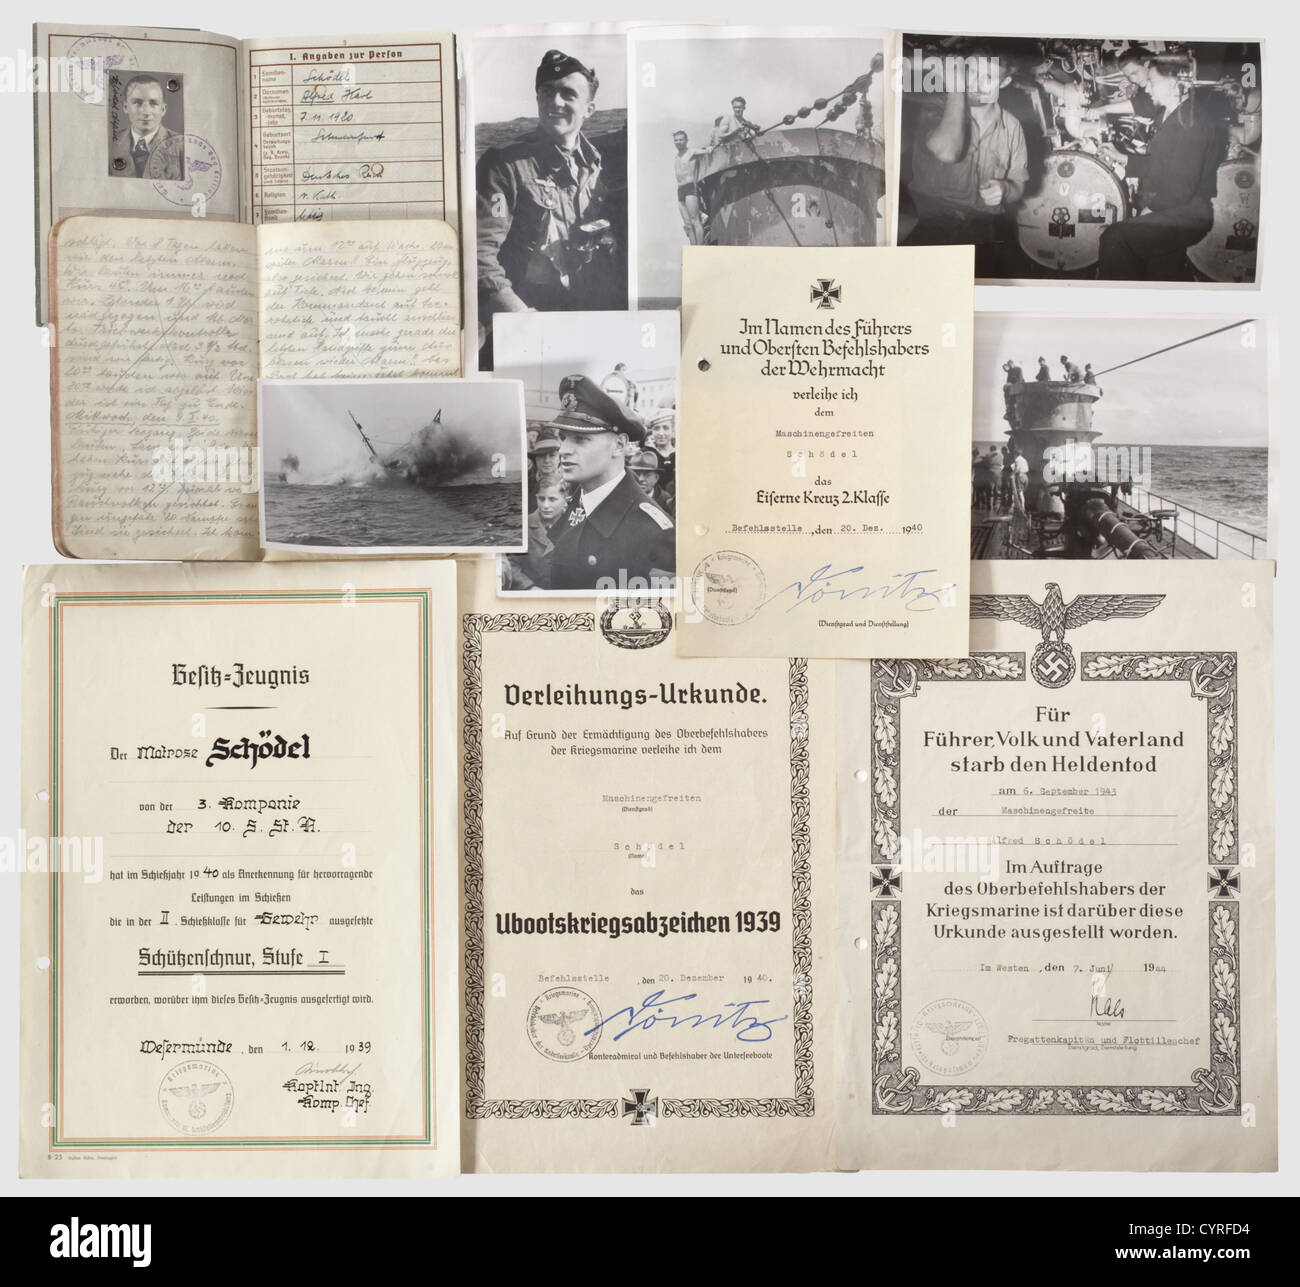 Documents and photos,of a Machinist First Class aboard 'U-43' Six small daily log books of his cruises with technical,nautical and private notes,tonnage sunk etc. Also,his Wehrpass dated 1 May 1939 with entries for U-Boat Flotilla 2,the U-Boat War Badge,Iron Cross 1st and 2nd Classes. Award documents for the Shooting Lanyard 1st Class,the U-Boat War Badge and the Iron Cross 2nd Class of 1939(with possession document). A pocket calendar from 'U-43' for the year 1943. Death document(Heldentodurkunde)and letters of condolence from his flotilla chief,Kre,Additional-Rights-Clearences-Not Available Stock Photo